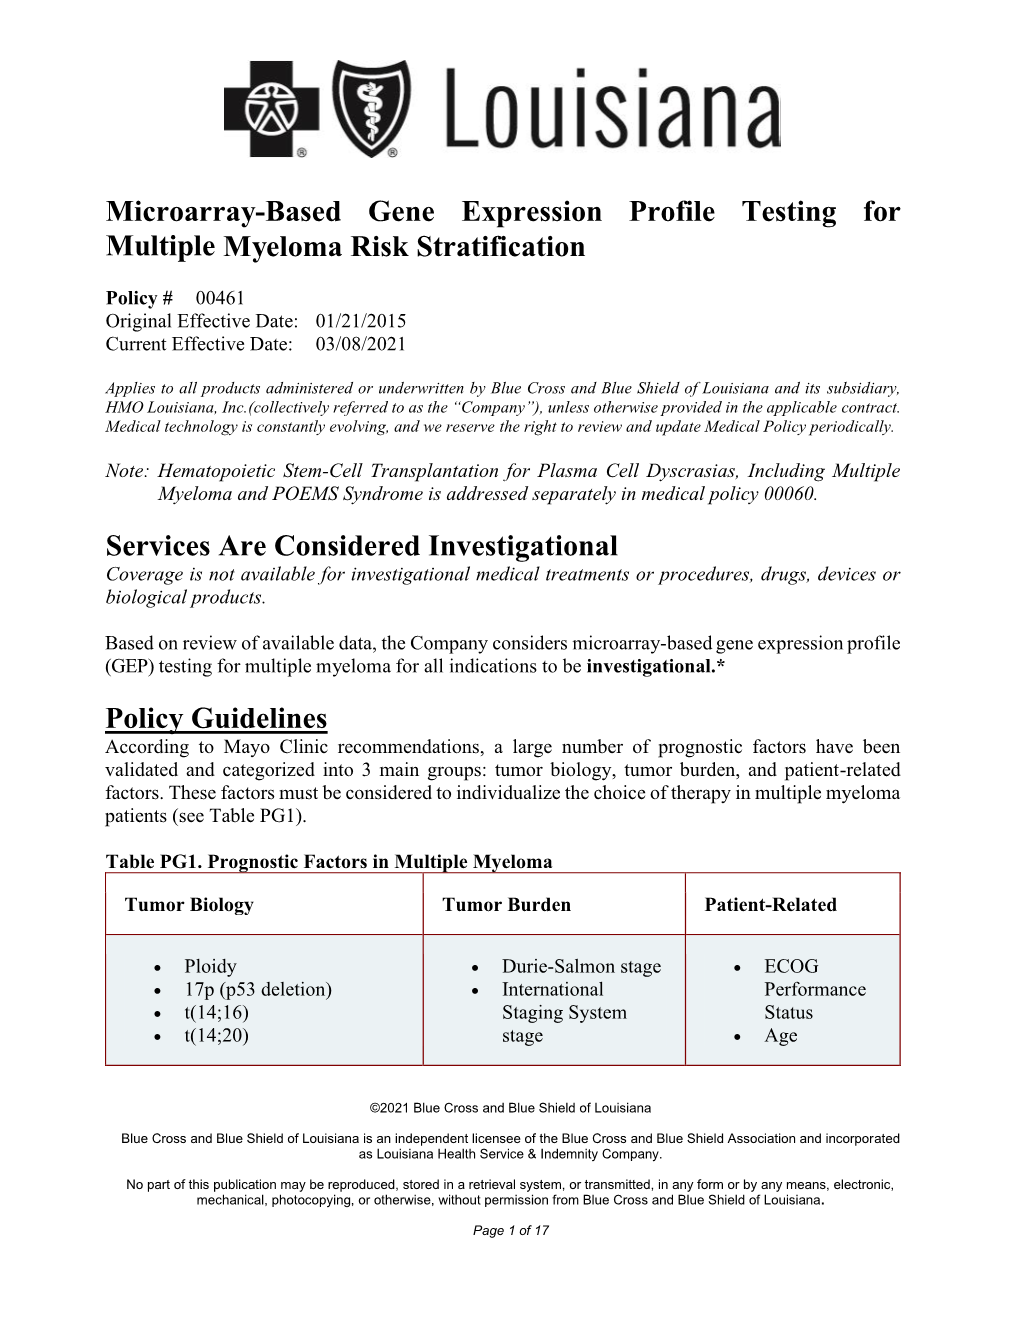 Microarray-Based Gene Expression Profile Testing for Multiple Myeloma Risk Stratification